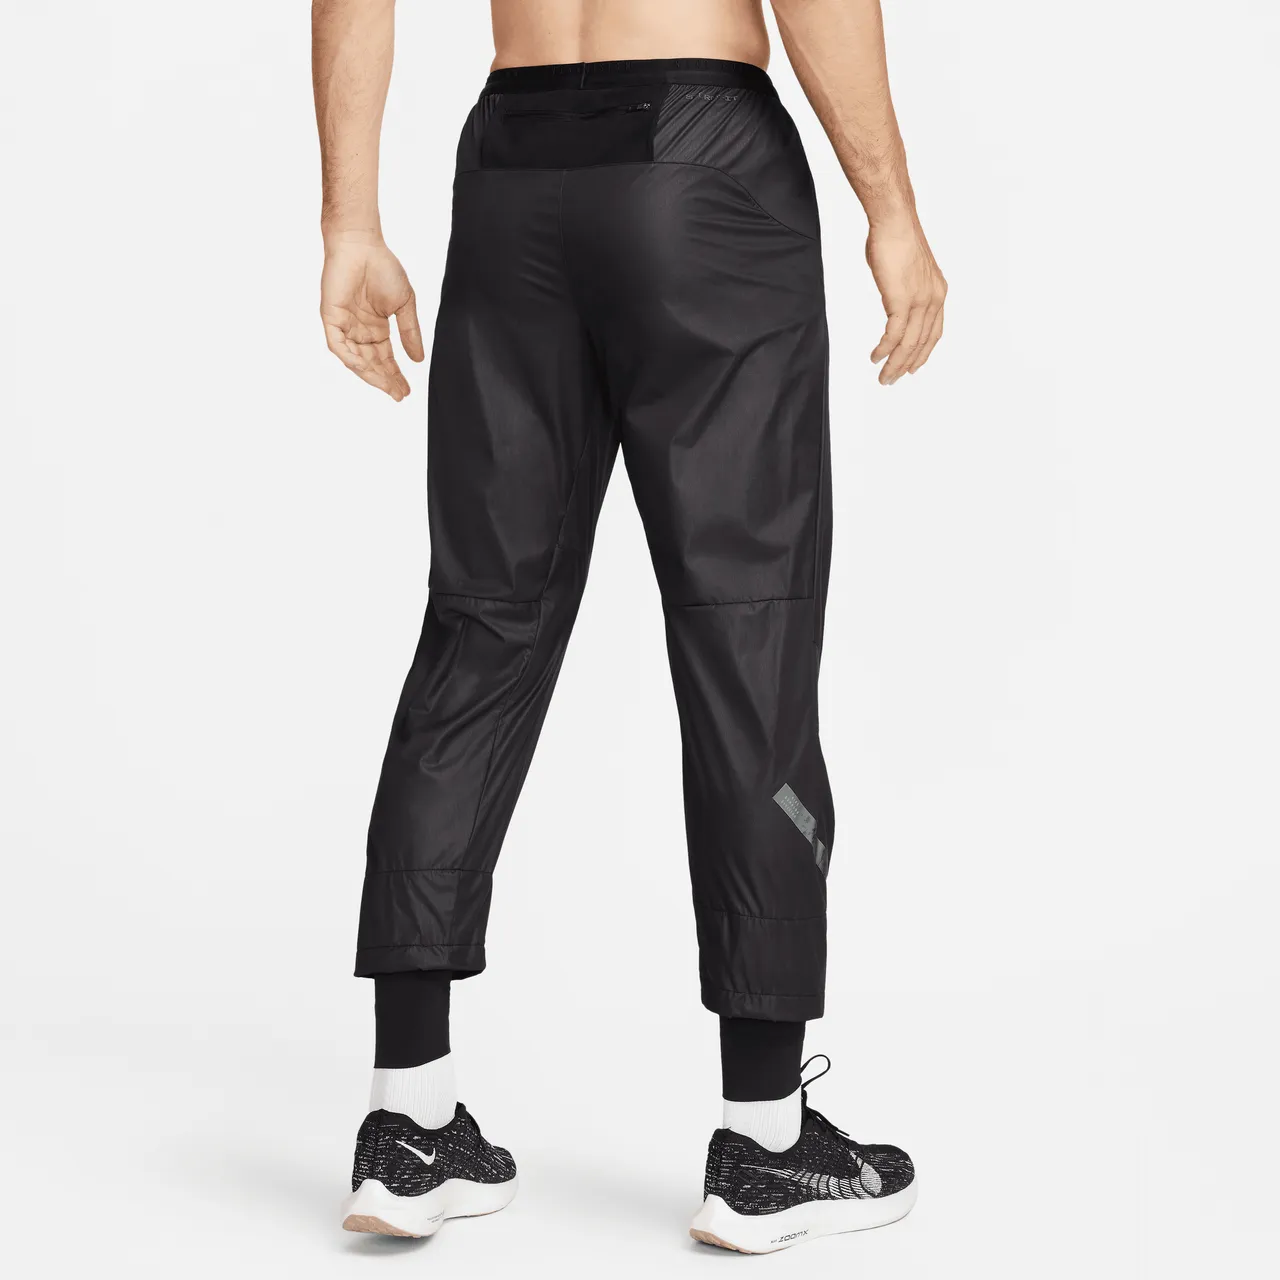 Nike Running Division Phenom Men's Storm-FIT Running Trousers - Black - Polyester